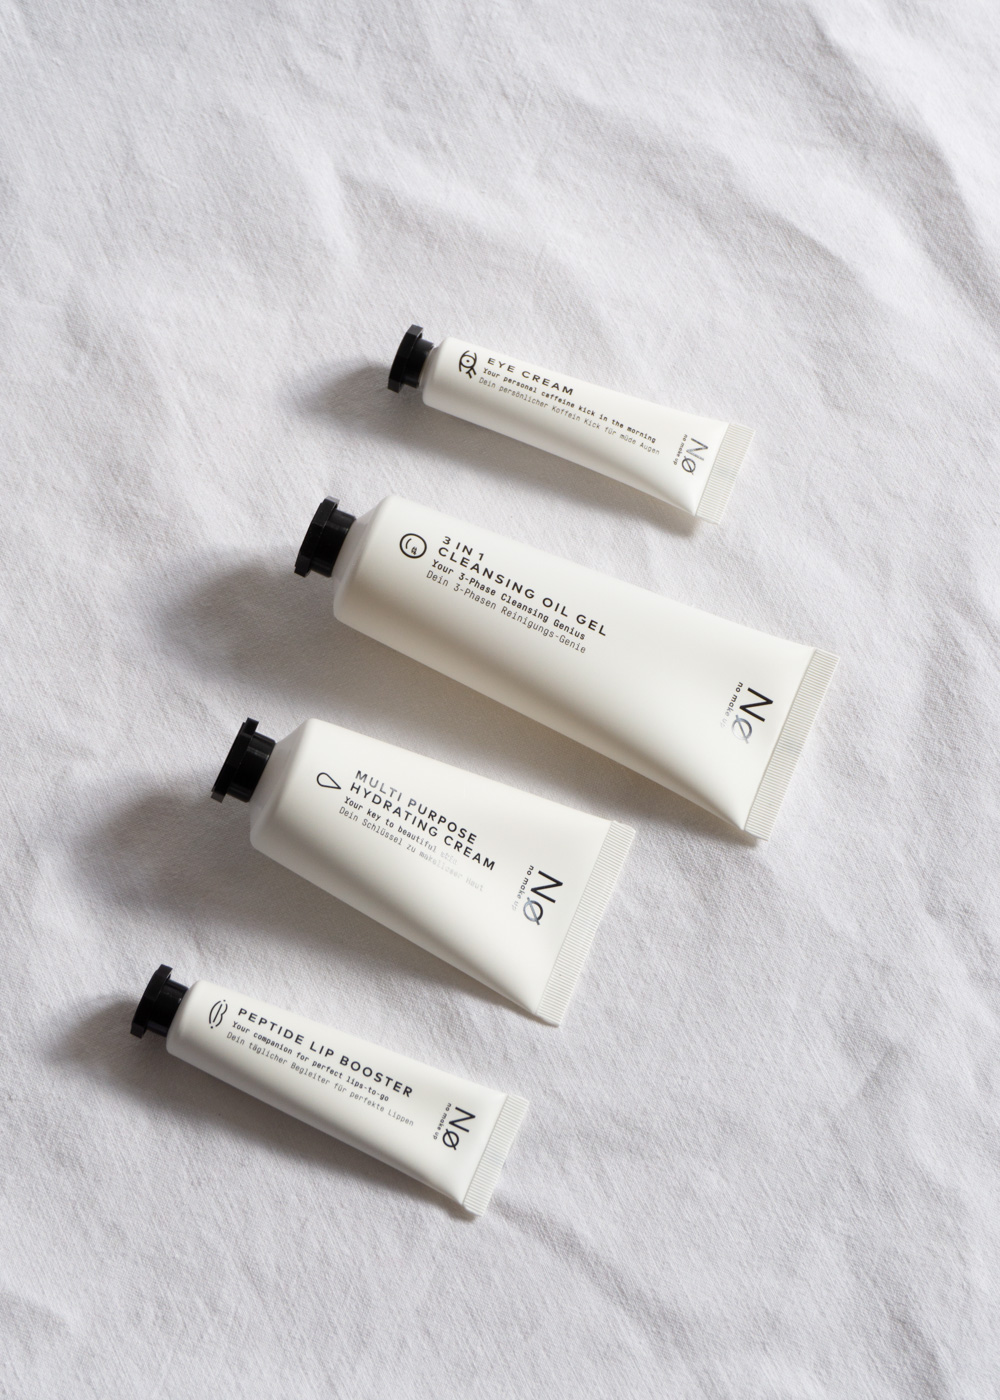 No Cosmetics - Minimalist Skincare, Simple Everyday Beauty | Product Photography, Packaging Desing, Shadow Play, Lighting, Vegan Cosmetics | RG Daily Blog